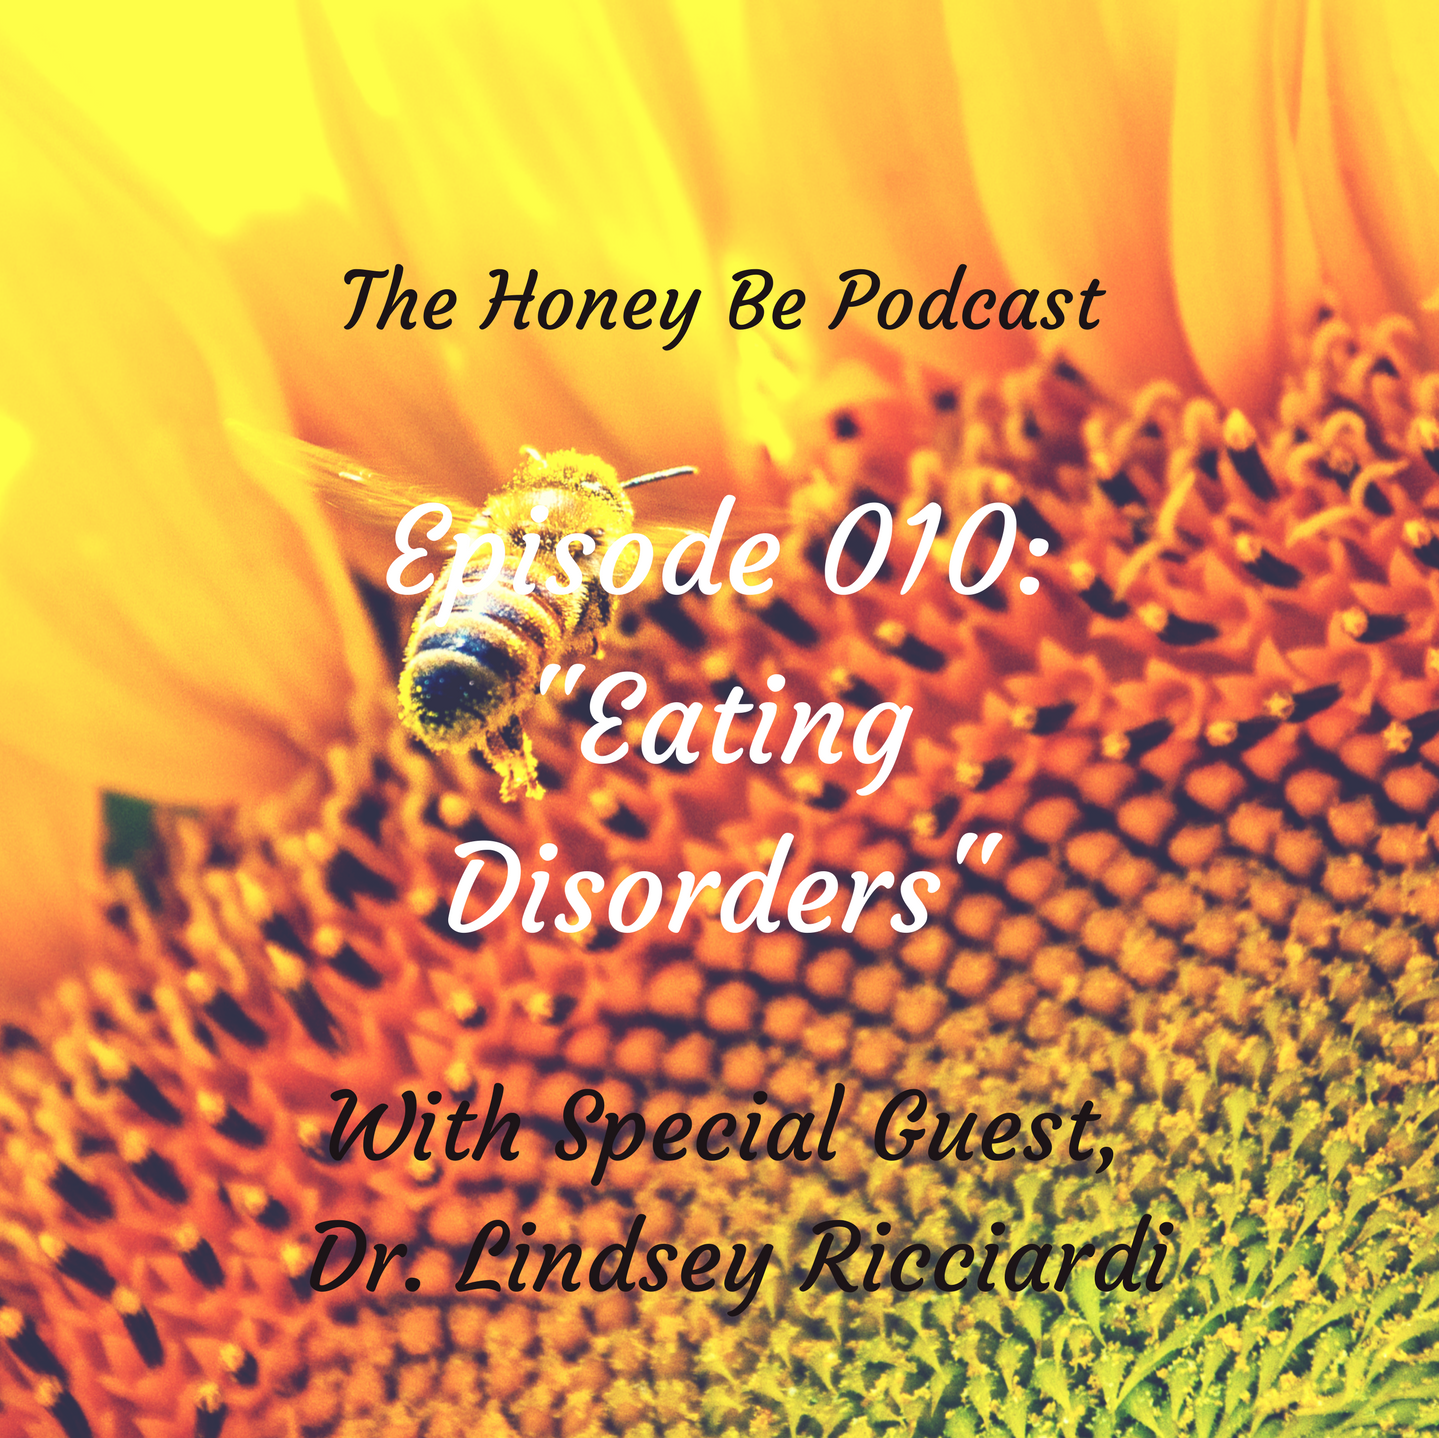 The Honey Be Podcast – Ep. 010: “Eating Disorders”